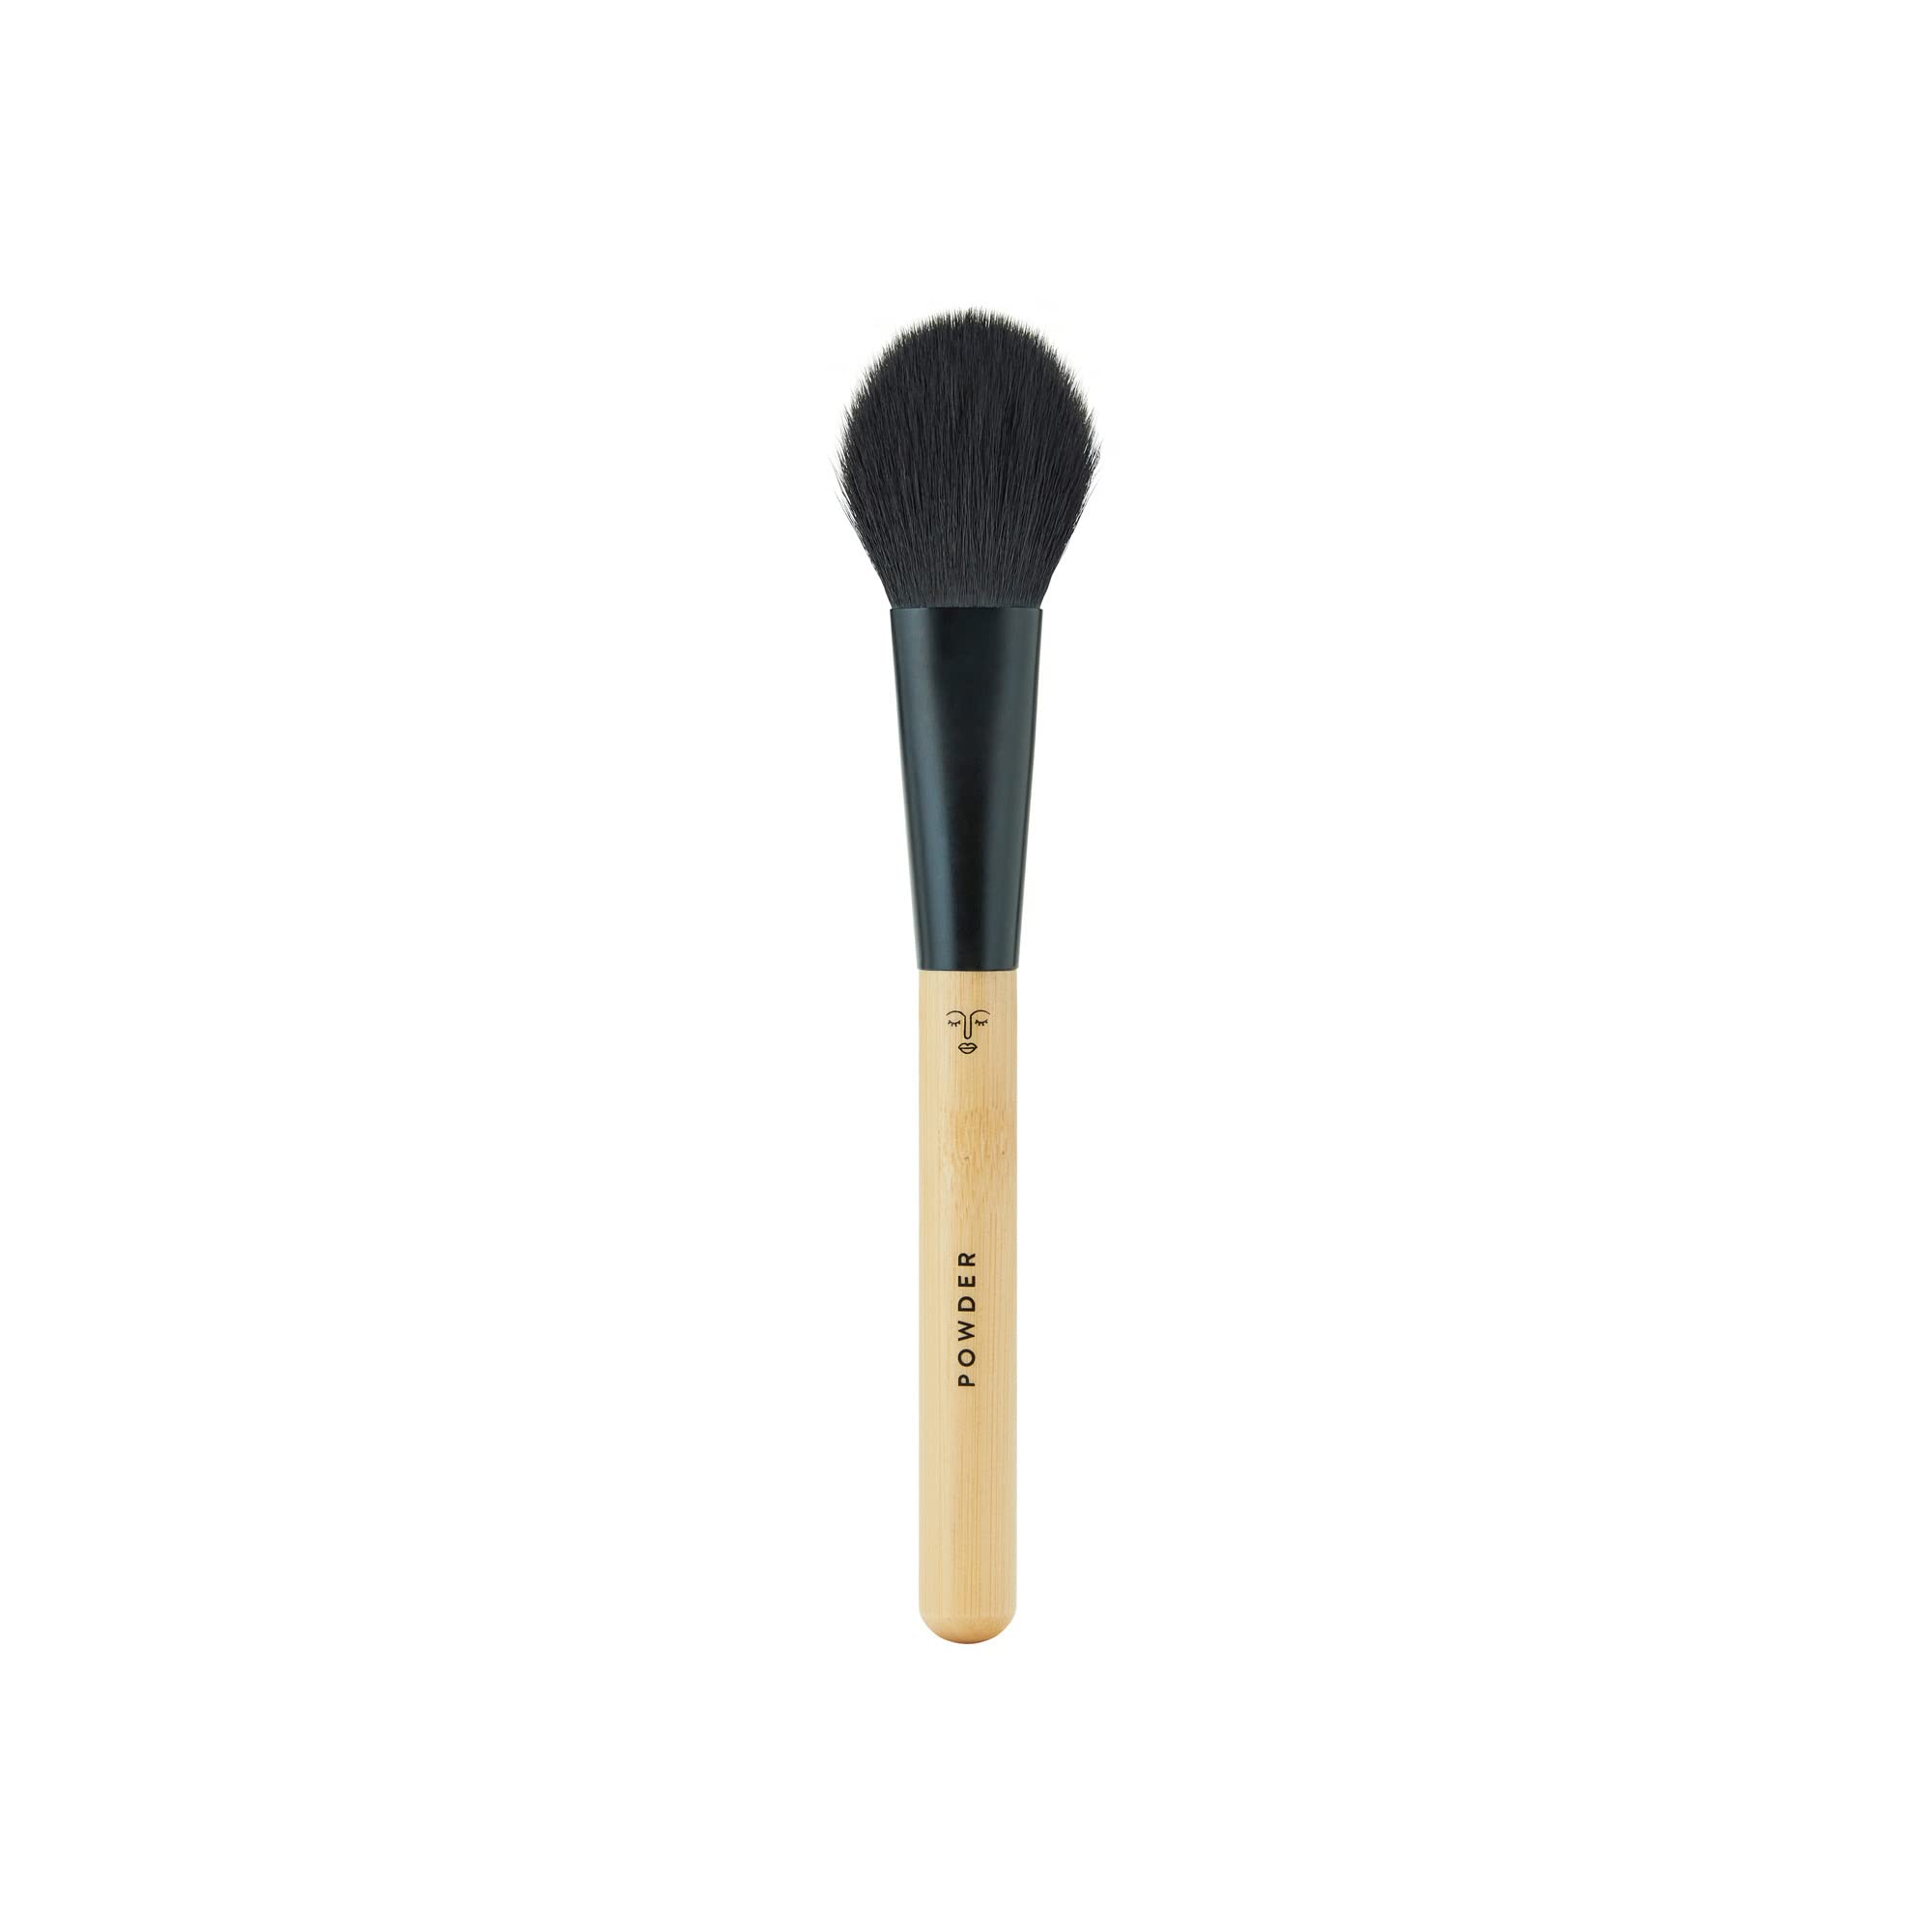 Honest Beauty Powder Brush with Renewable Bamboo + Synthetic Bristles | Makeup Brush for Loose + Pressed Powders | Cruelty Free | 1 count